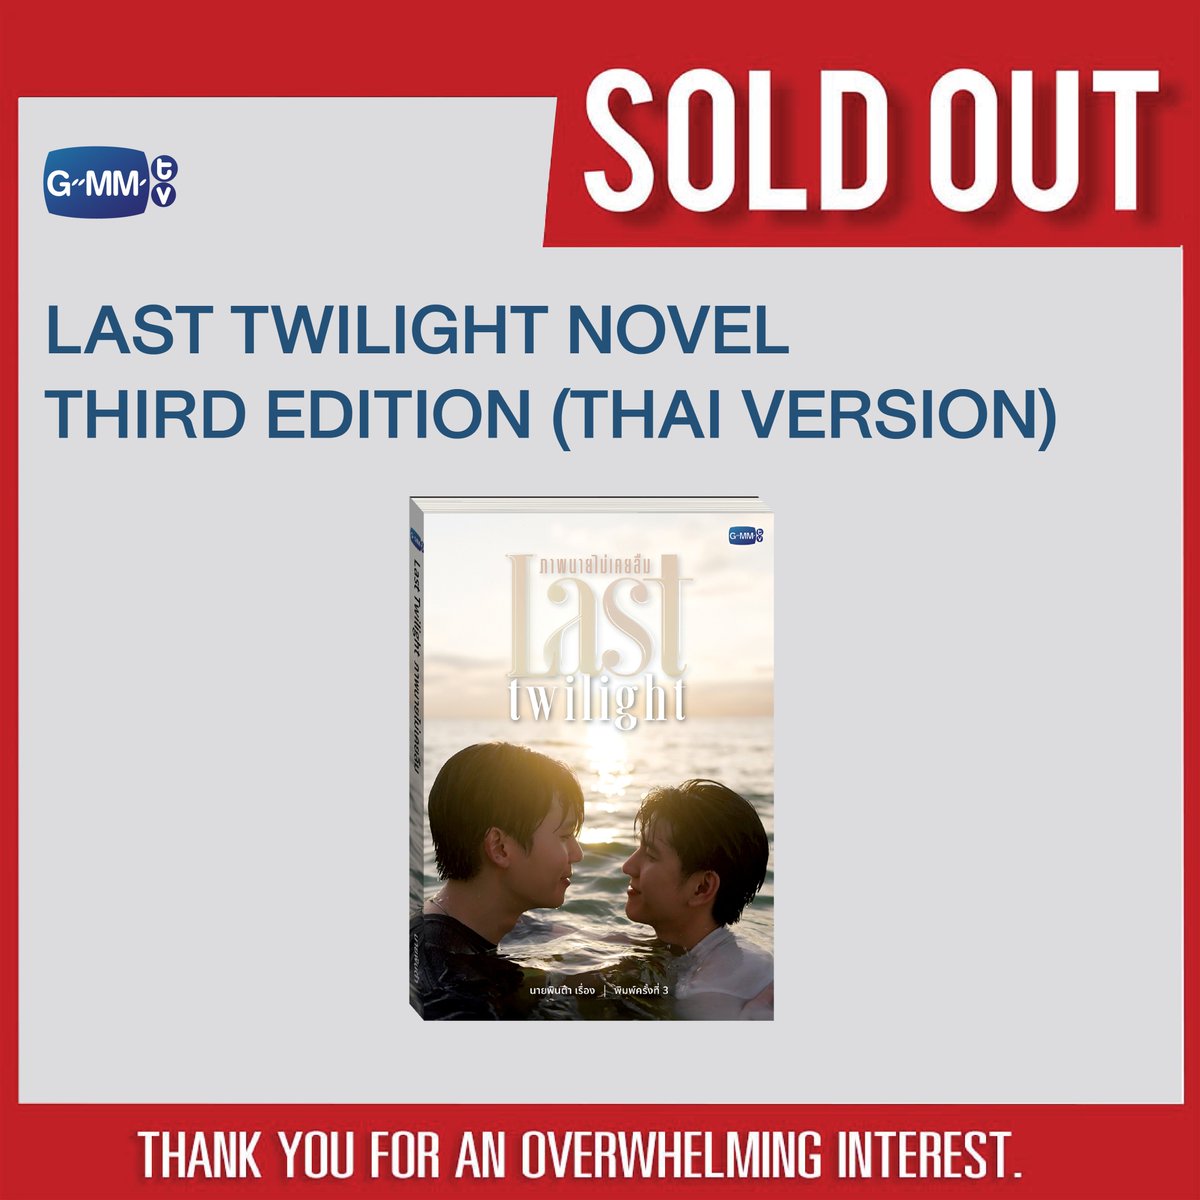 SOLD OUT! 🎉

🙏🏻 Thank you for an overwhelming interest in LAST TWILIGHT NOVEL THIRD EDITION (THAI VERSION).

#LastTwilightSeries
#GMMTV